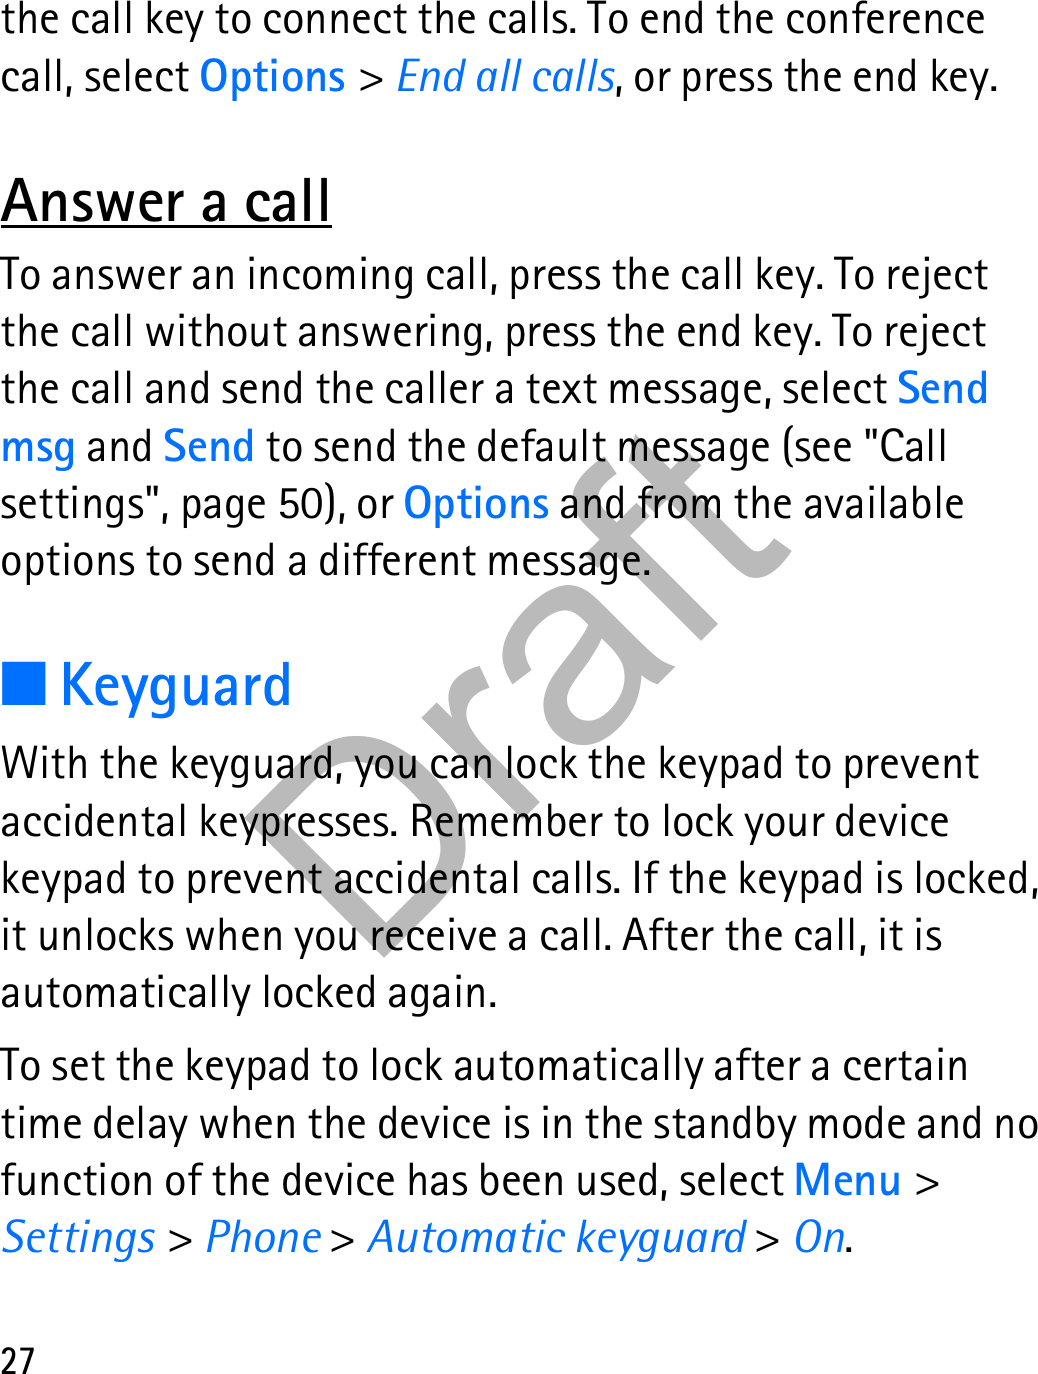 27the call key to connect the calls. To end the conference call, select Options &gt; End all calls, or press the end key.Answer a callTo answer an incoming call, press the call key. To reject the call without answering, press the end key. To reject the call and send the caller a text message, select Send msg and Send to send the default message (see &quot;Call settings&quot;, page 50), or Options and from the available options to send a different message.■KeyguardWith the keyguard, you can lock the keypad to prevent accidental keypresses. Remember to lock your device keypad to prevent accidental calls. If the keypad is locked, it unlocks when you receive a call. After the call, it is automatically locked again.To set the keypad to lock automatically after a certain time delay when the device is in the standby mode and no function of the device has been used, select Menu &gt; Settings &gt; Phone &gt; Automatic keyguard &gt; On.Draft